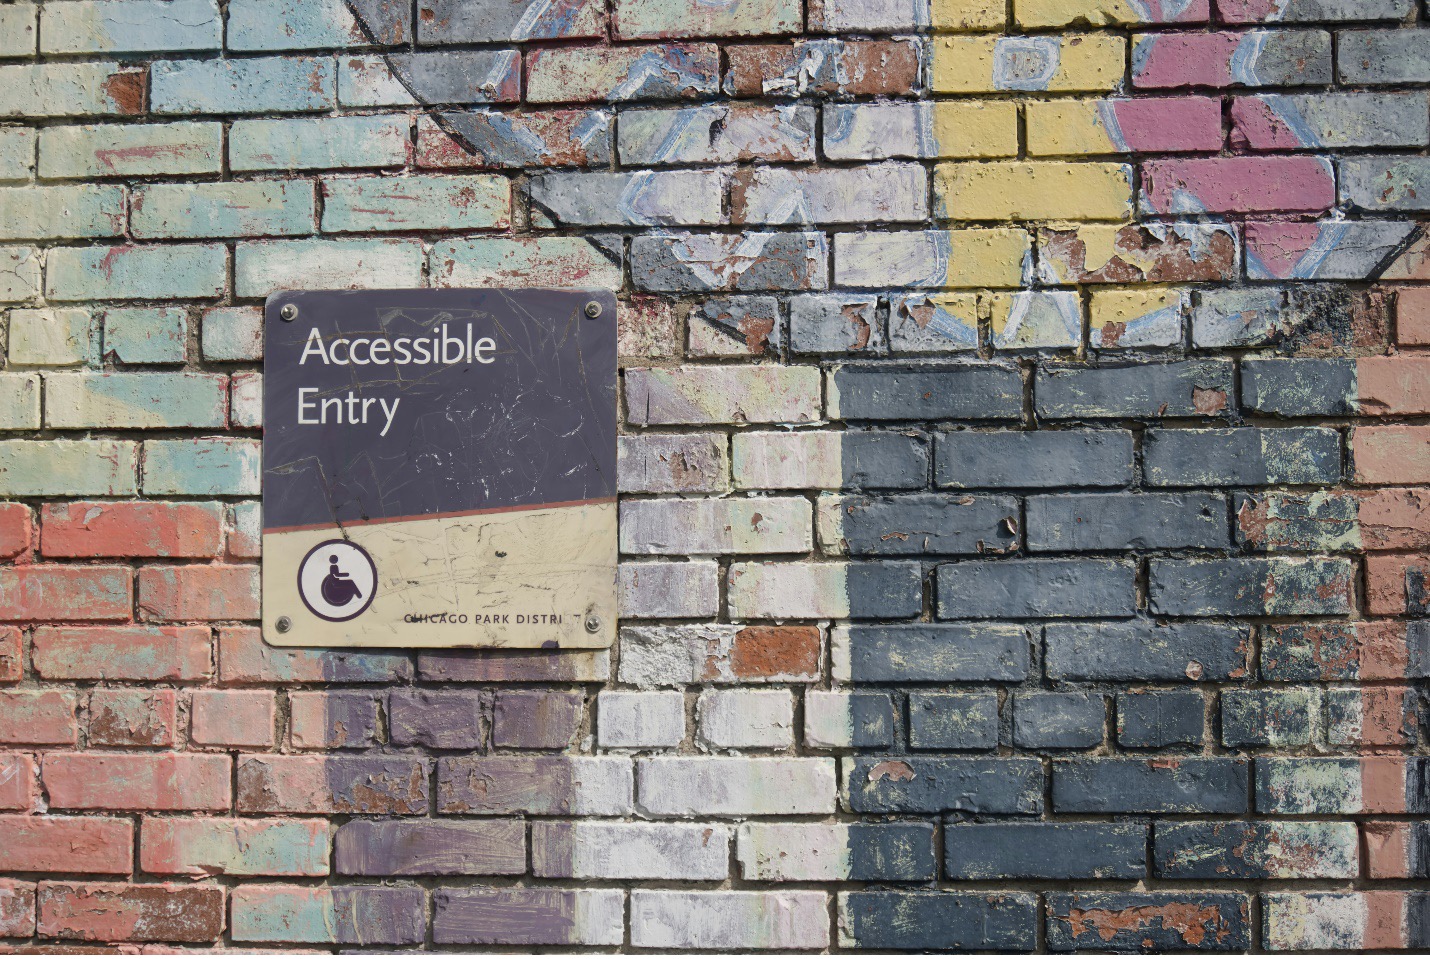 Photograph of a brick wall with a faded painted mural on it; the word "Park" can be made out. On the brick wall is a sign that reads "Accessible Entry" with a graphic of a wheelchair user on it.